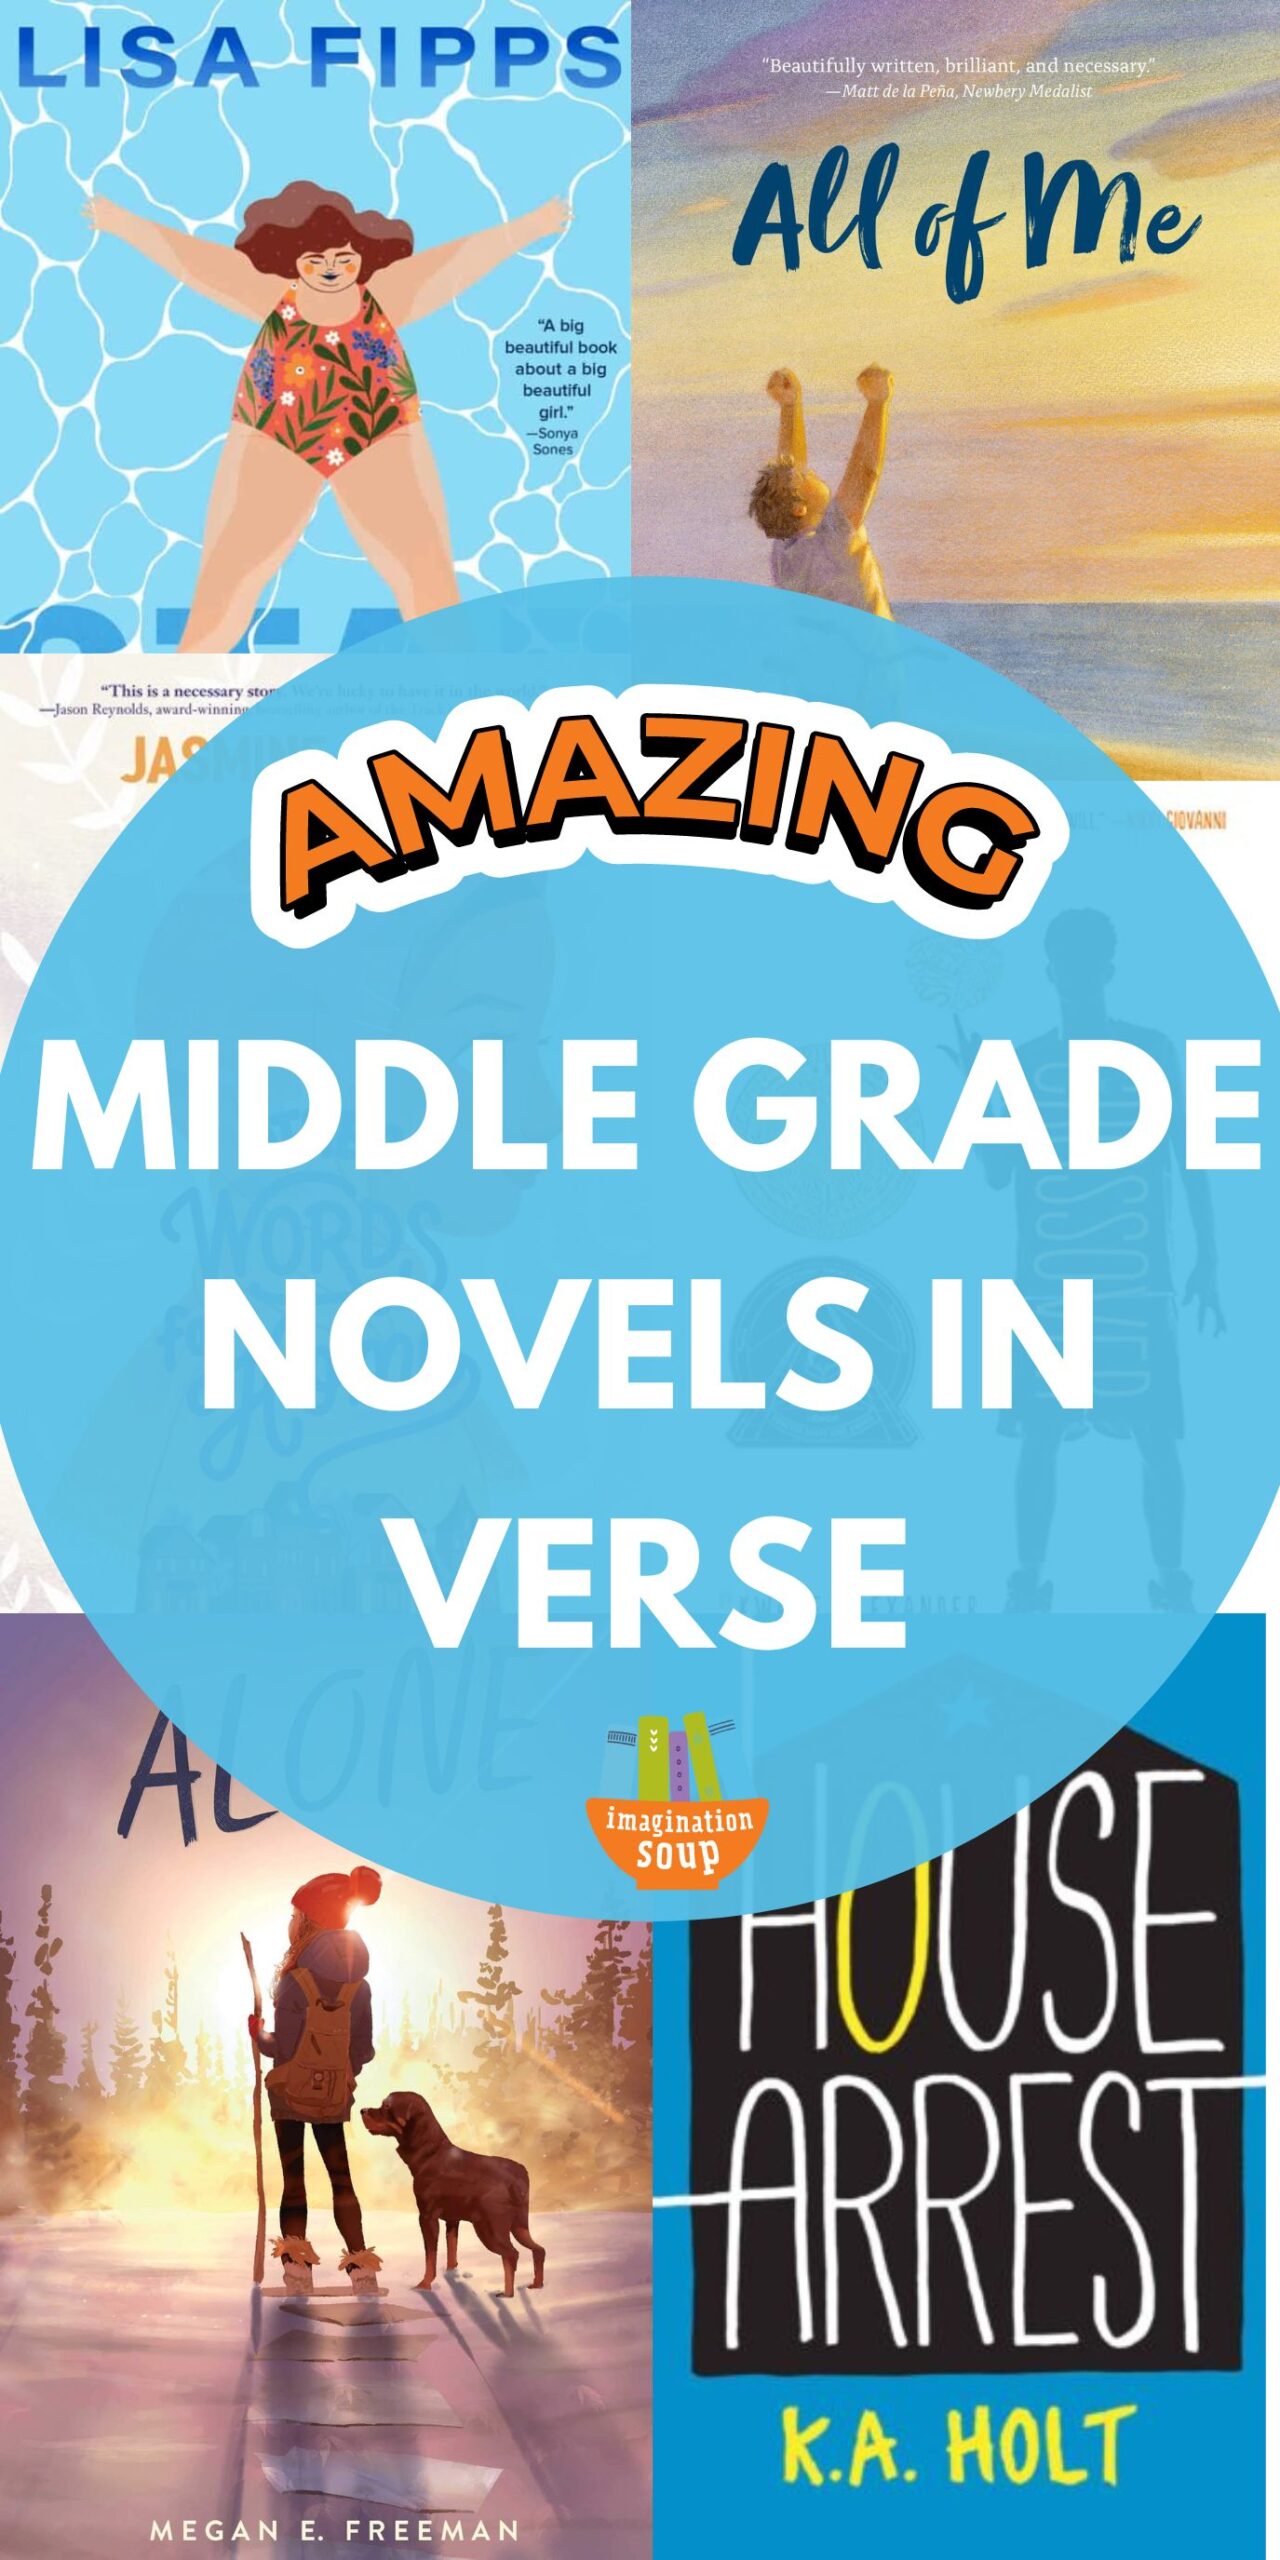 Have your tween kids tried reading middle grade novels in verse; stories written in free-verse poetry? The text looks easy to read enticing reluctant readers but dive deeper and you'll find compelling stories filled with heart, important themes, and precise language. A verse middle grade book (or YA novel) is a hybrid narrative structure with a text format that readers LOVE: poetry. Why do readers love reading verse form novels? Because verse books have a lot of white space, they're faster than prose novels, and they're impactful stories -- where fewer words must convey the story and character arc.